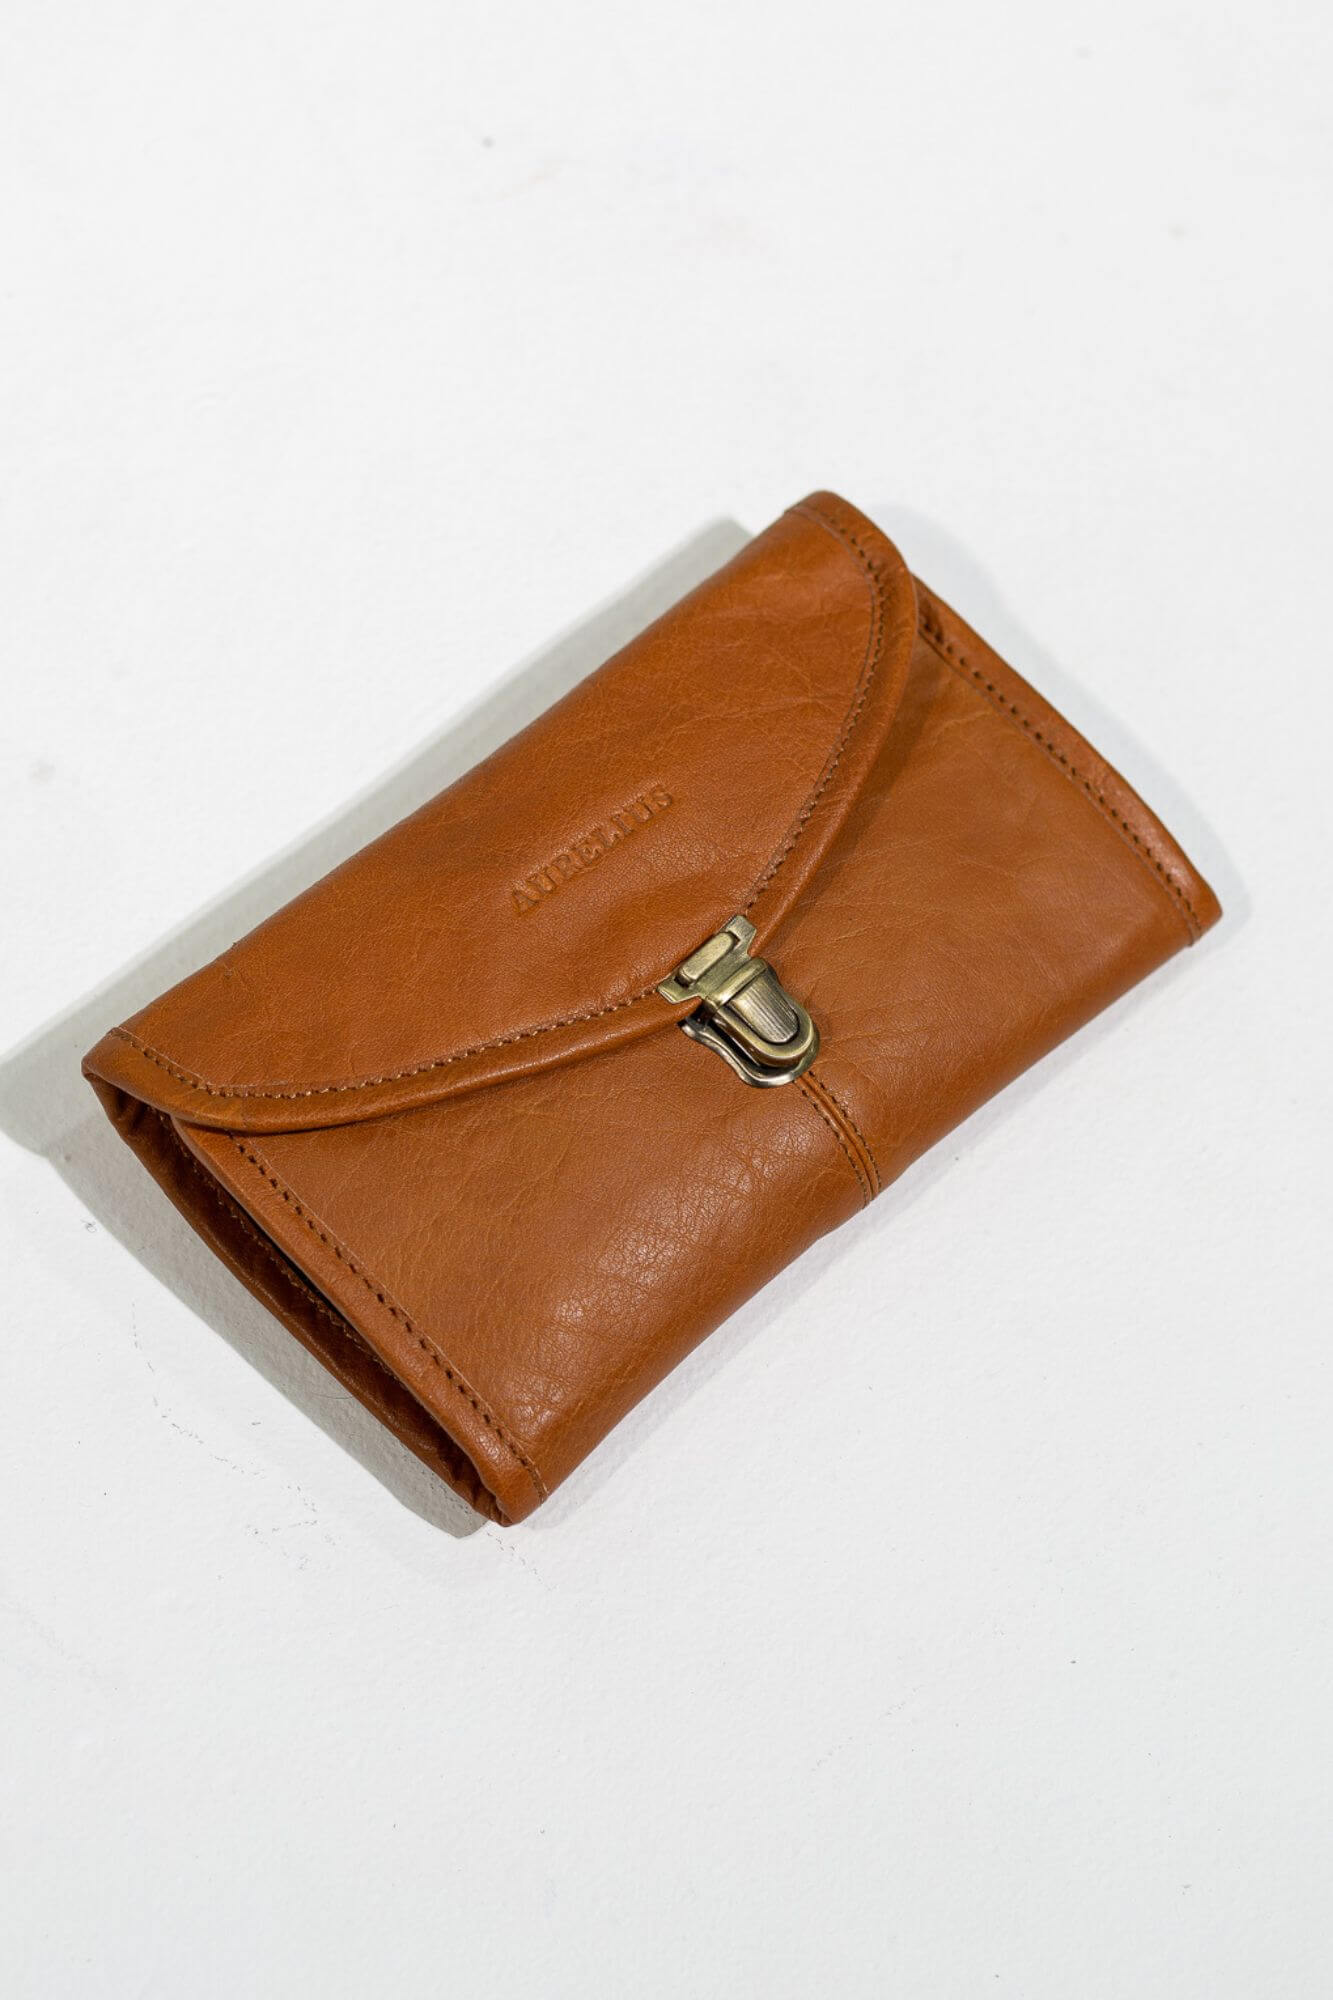 Aurelius Leather Leather Bag Tan Leather Carter Everyday Tech Wallet